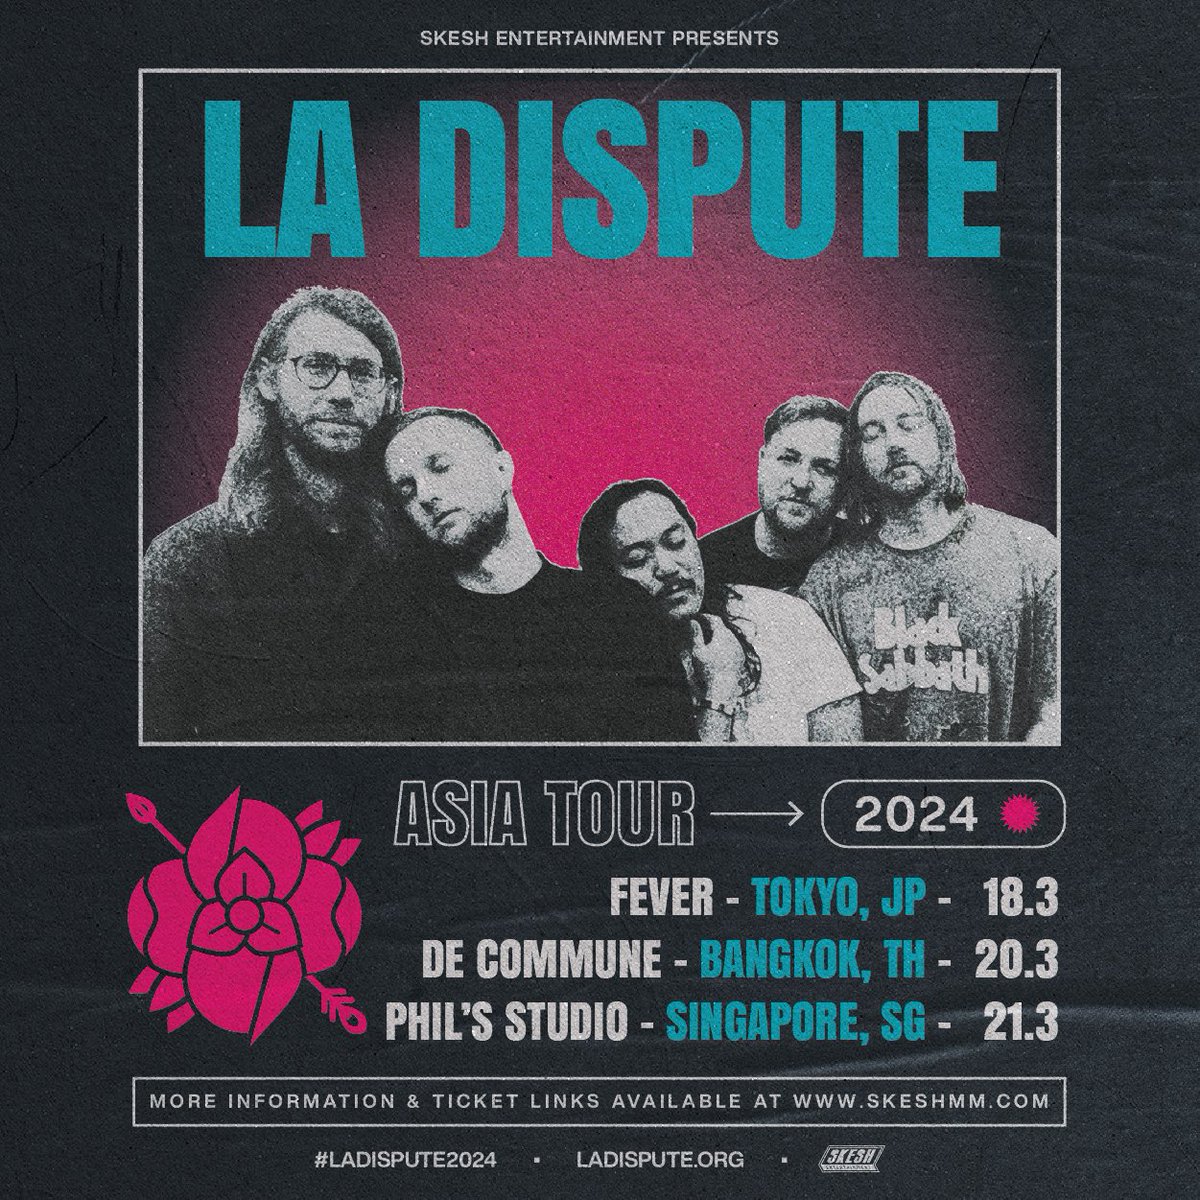 We heard you! Excited to announce that @ladisputeband will be touring Asia in March! Tickets on sale Feb 3rd, head to our website for more info skeshmm.com #LaDispute #SkeshEntertainment